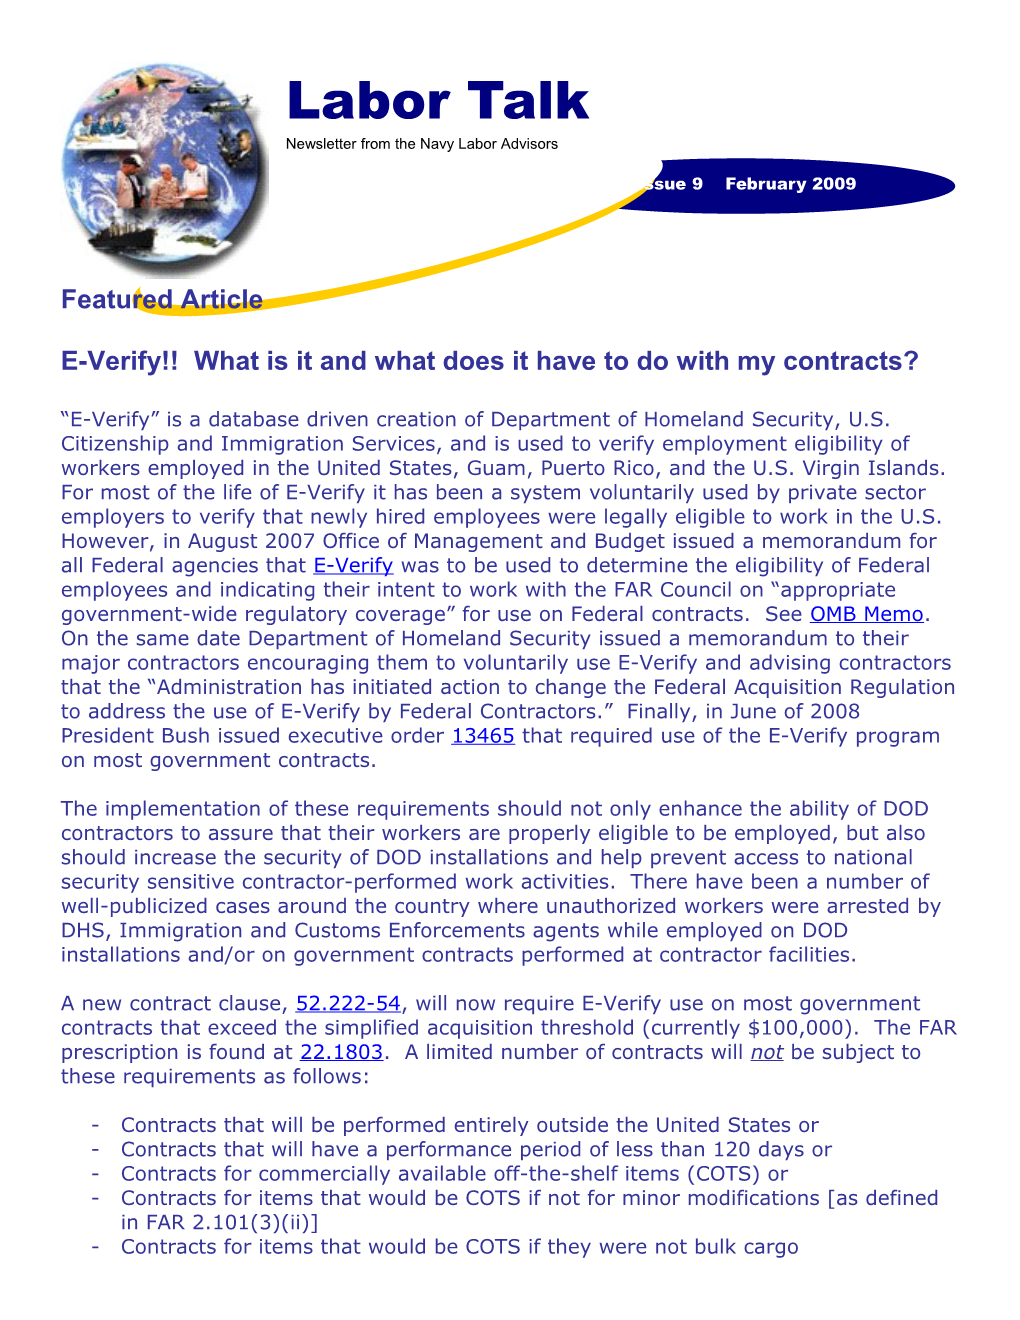 E-Verify What Is It and What Does It Have to Do with My Contracts?